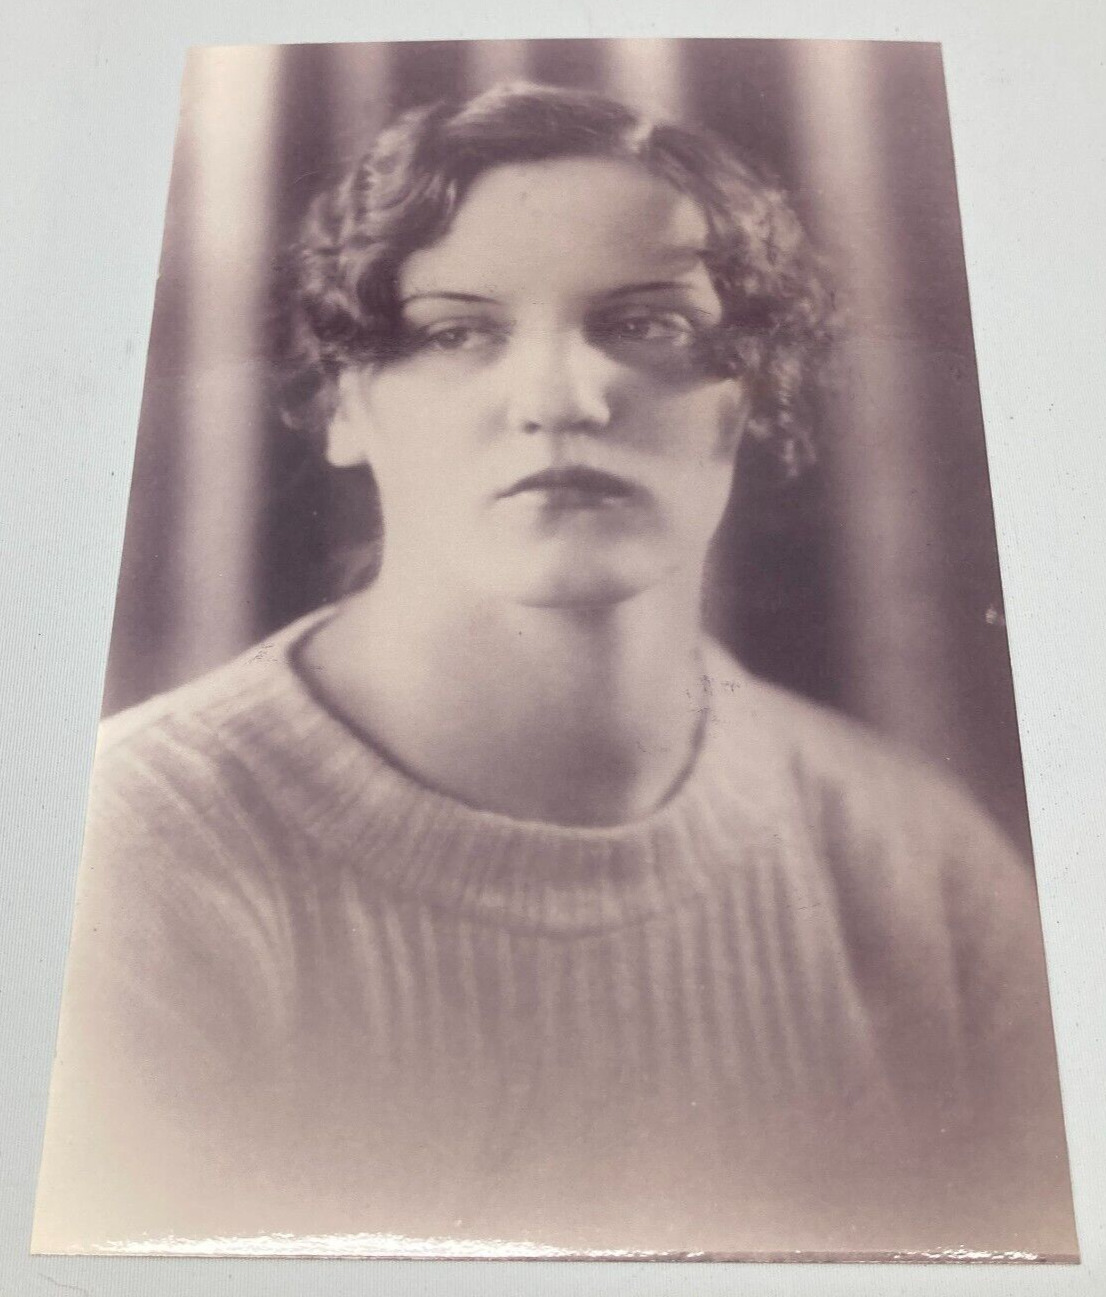 Found B&W Vintage Reprint Photo 1926 Portrait of Young Woman